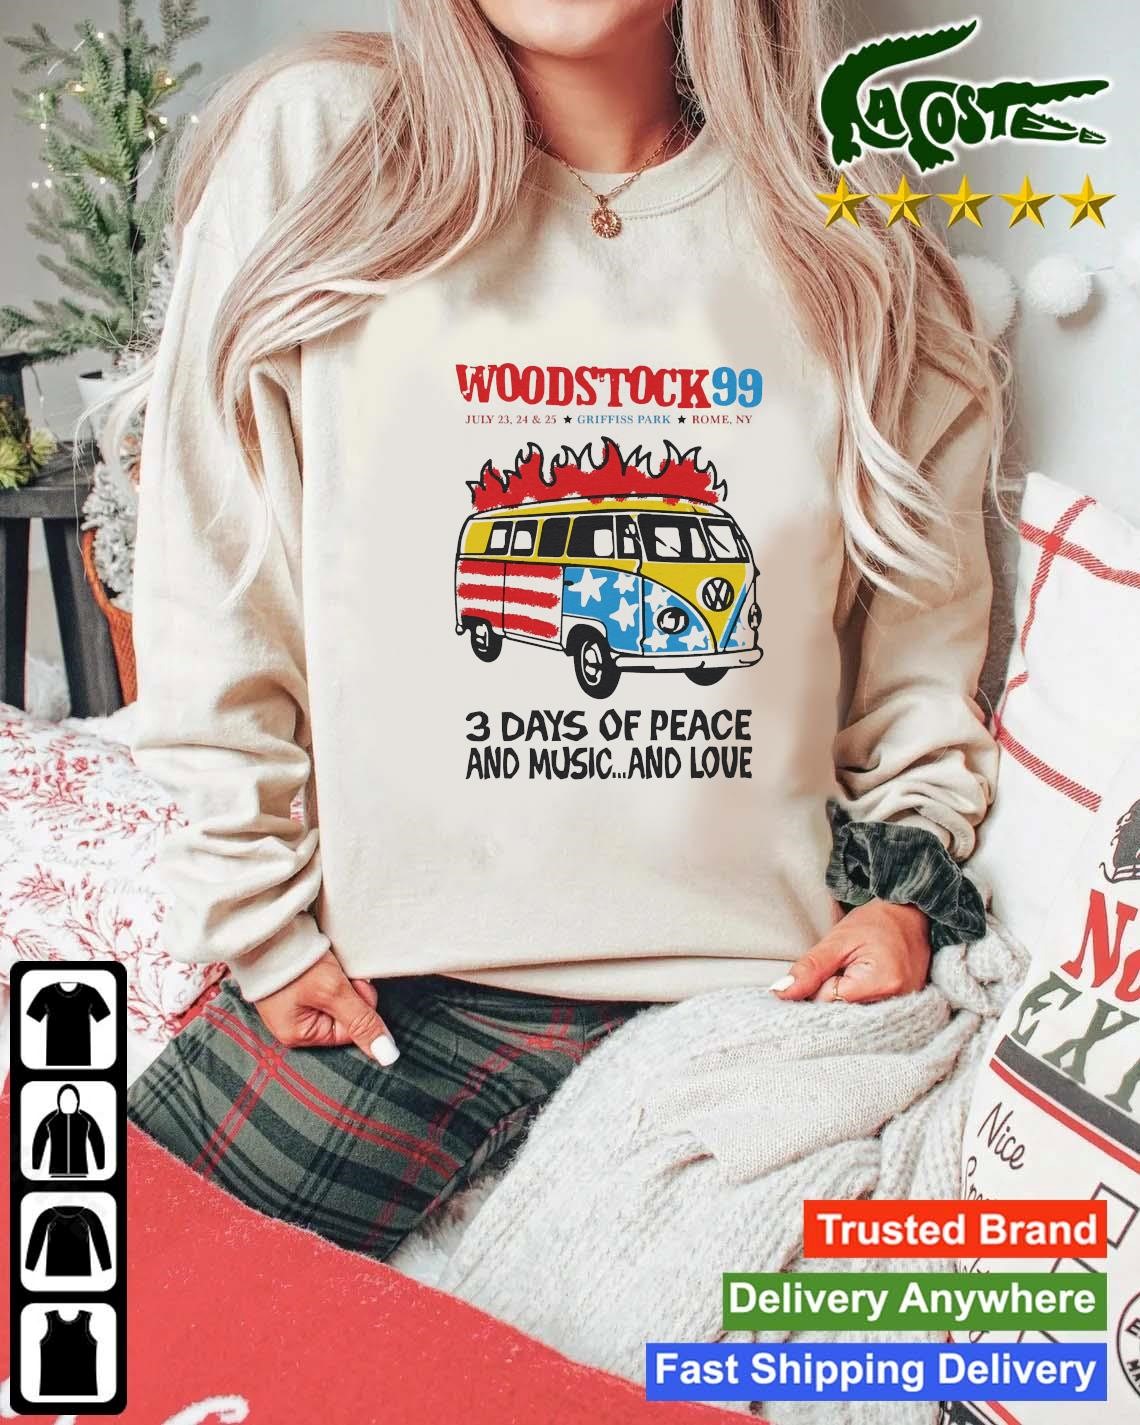 Woodstock 99 July 23 24 25 Griffiss Park Rome Ny 3 Days Of Peace And Music And Love Sweatshirt Mockup Sweater.jpg